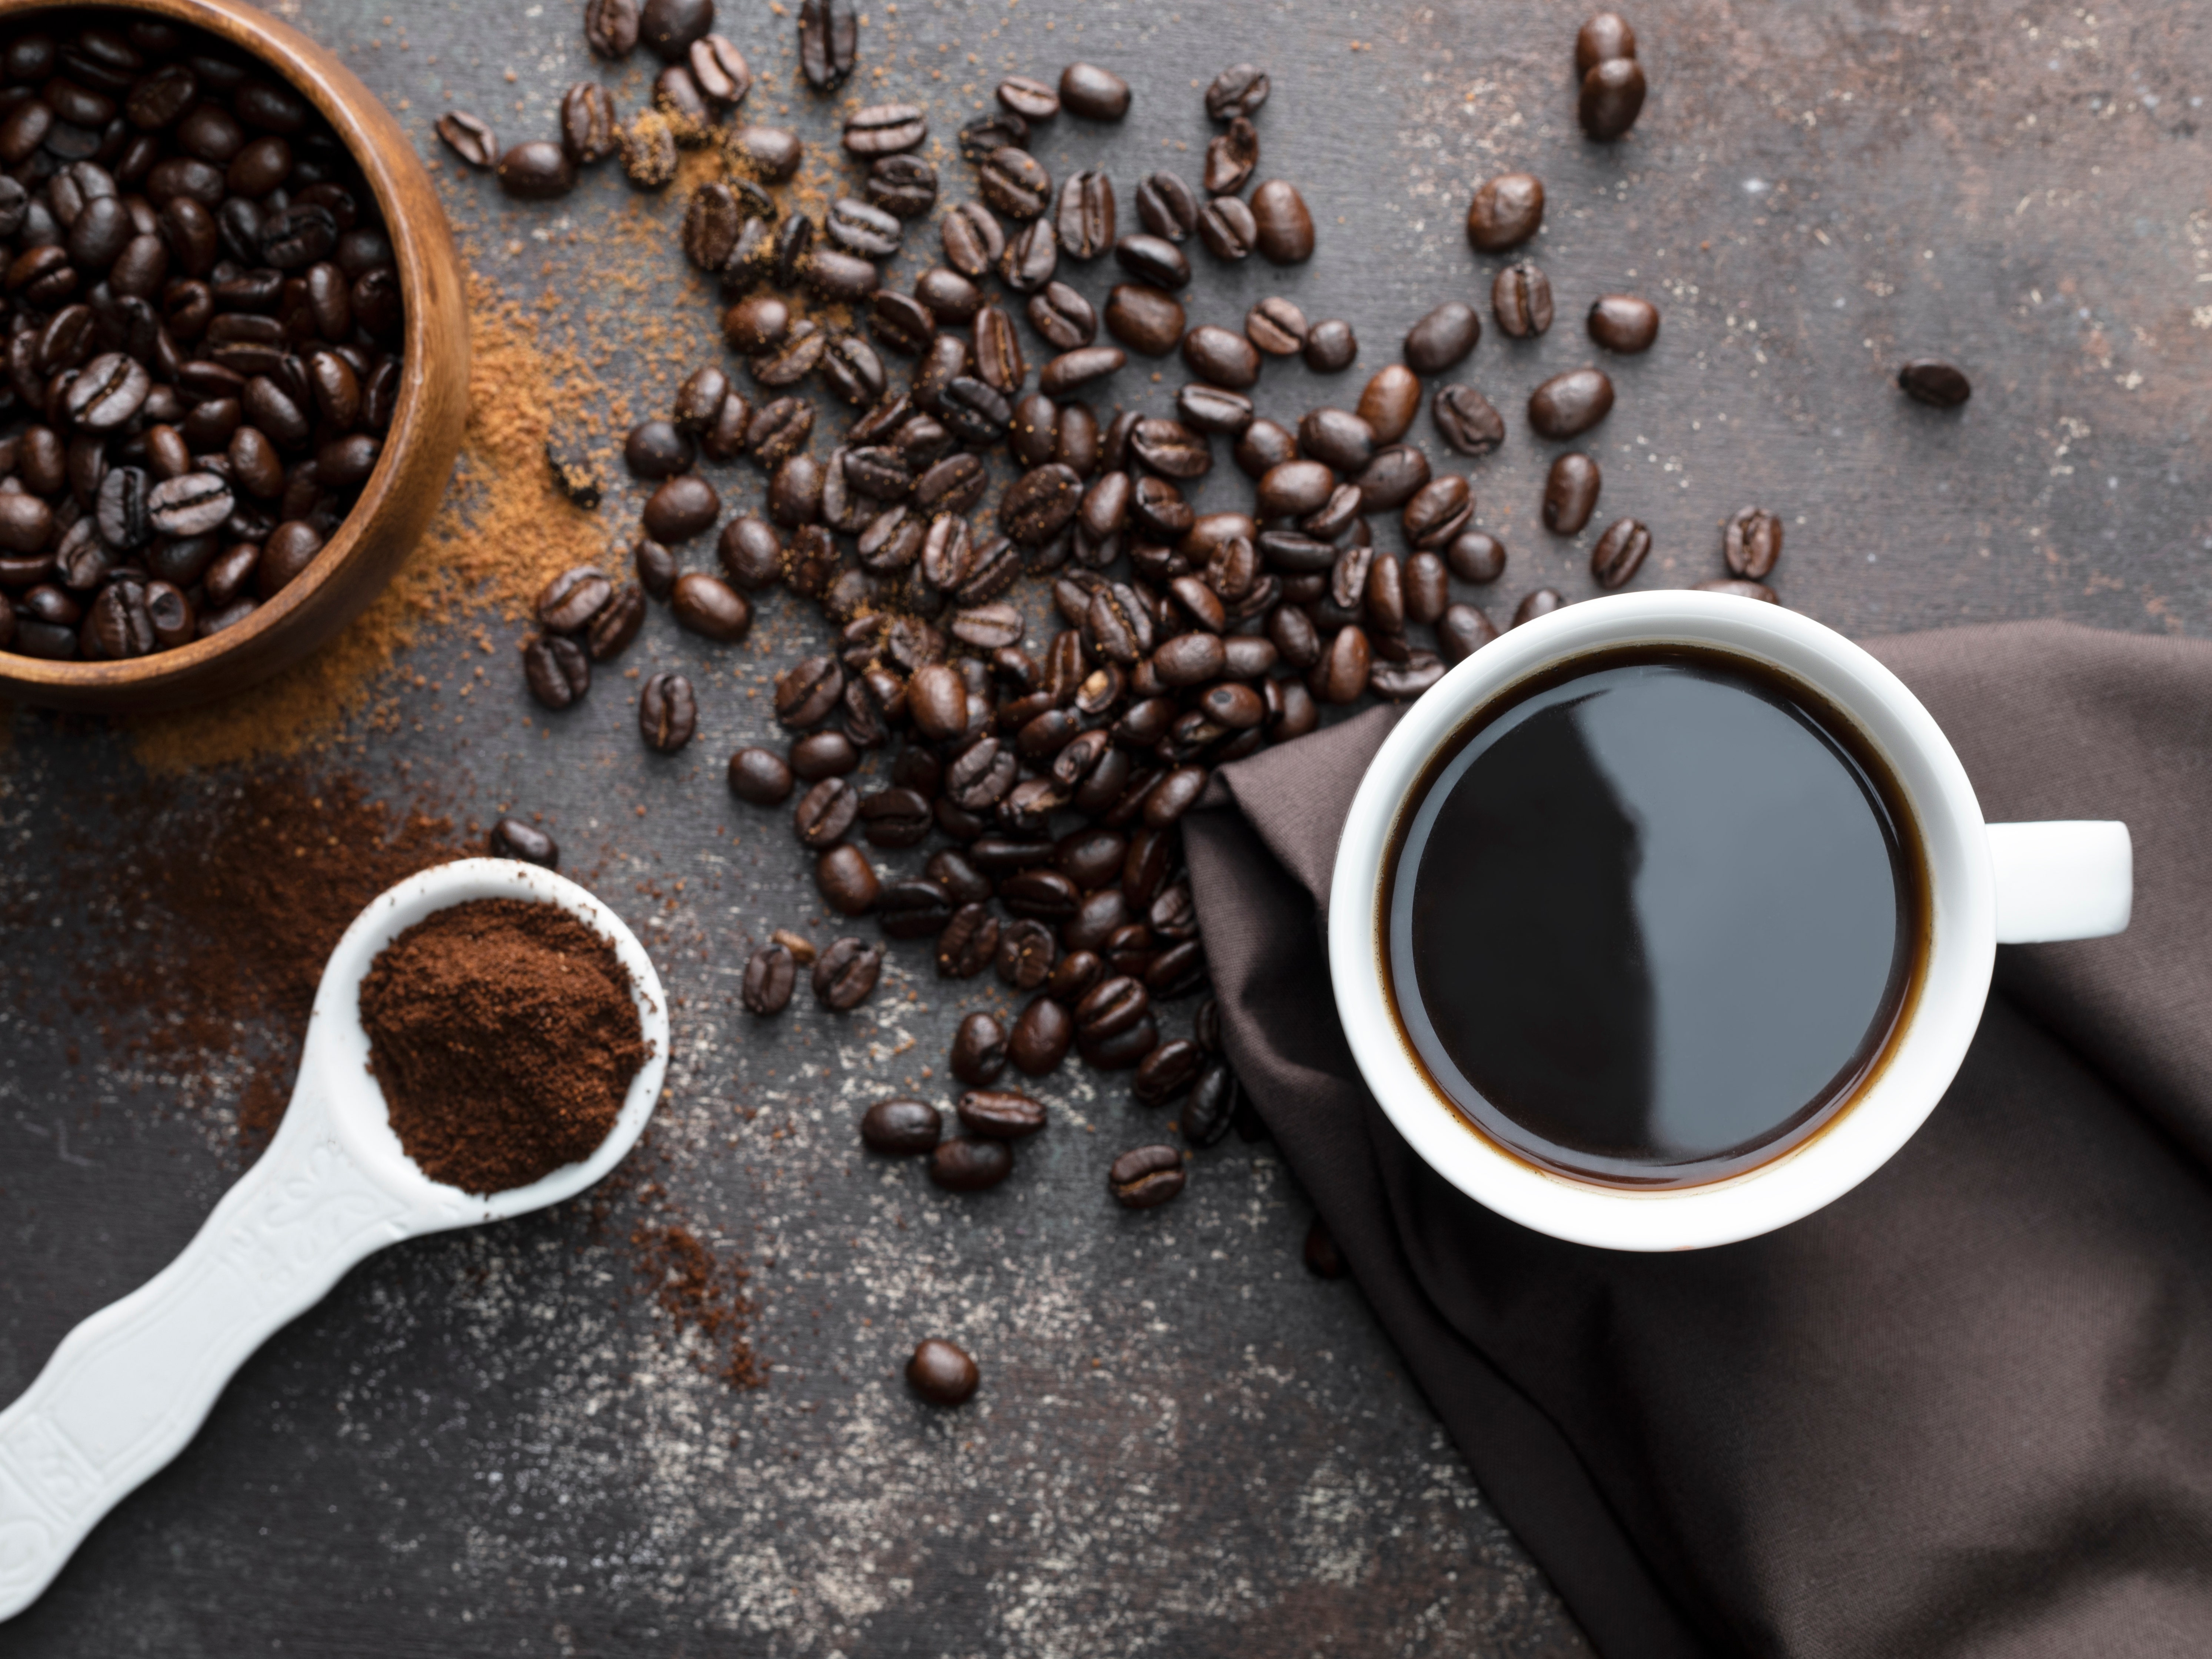 Southern California Chain Reborn Coffee Plans Expansion Into